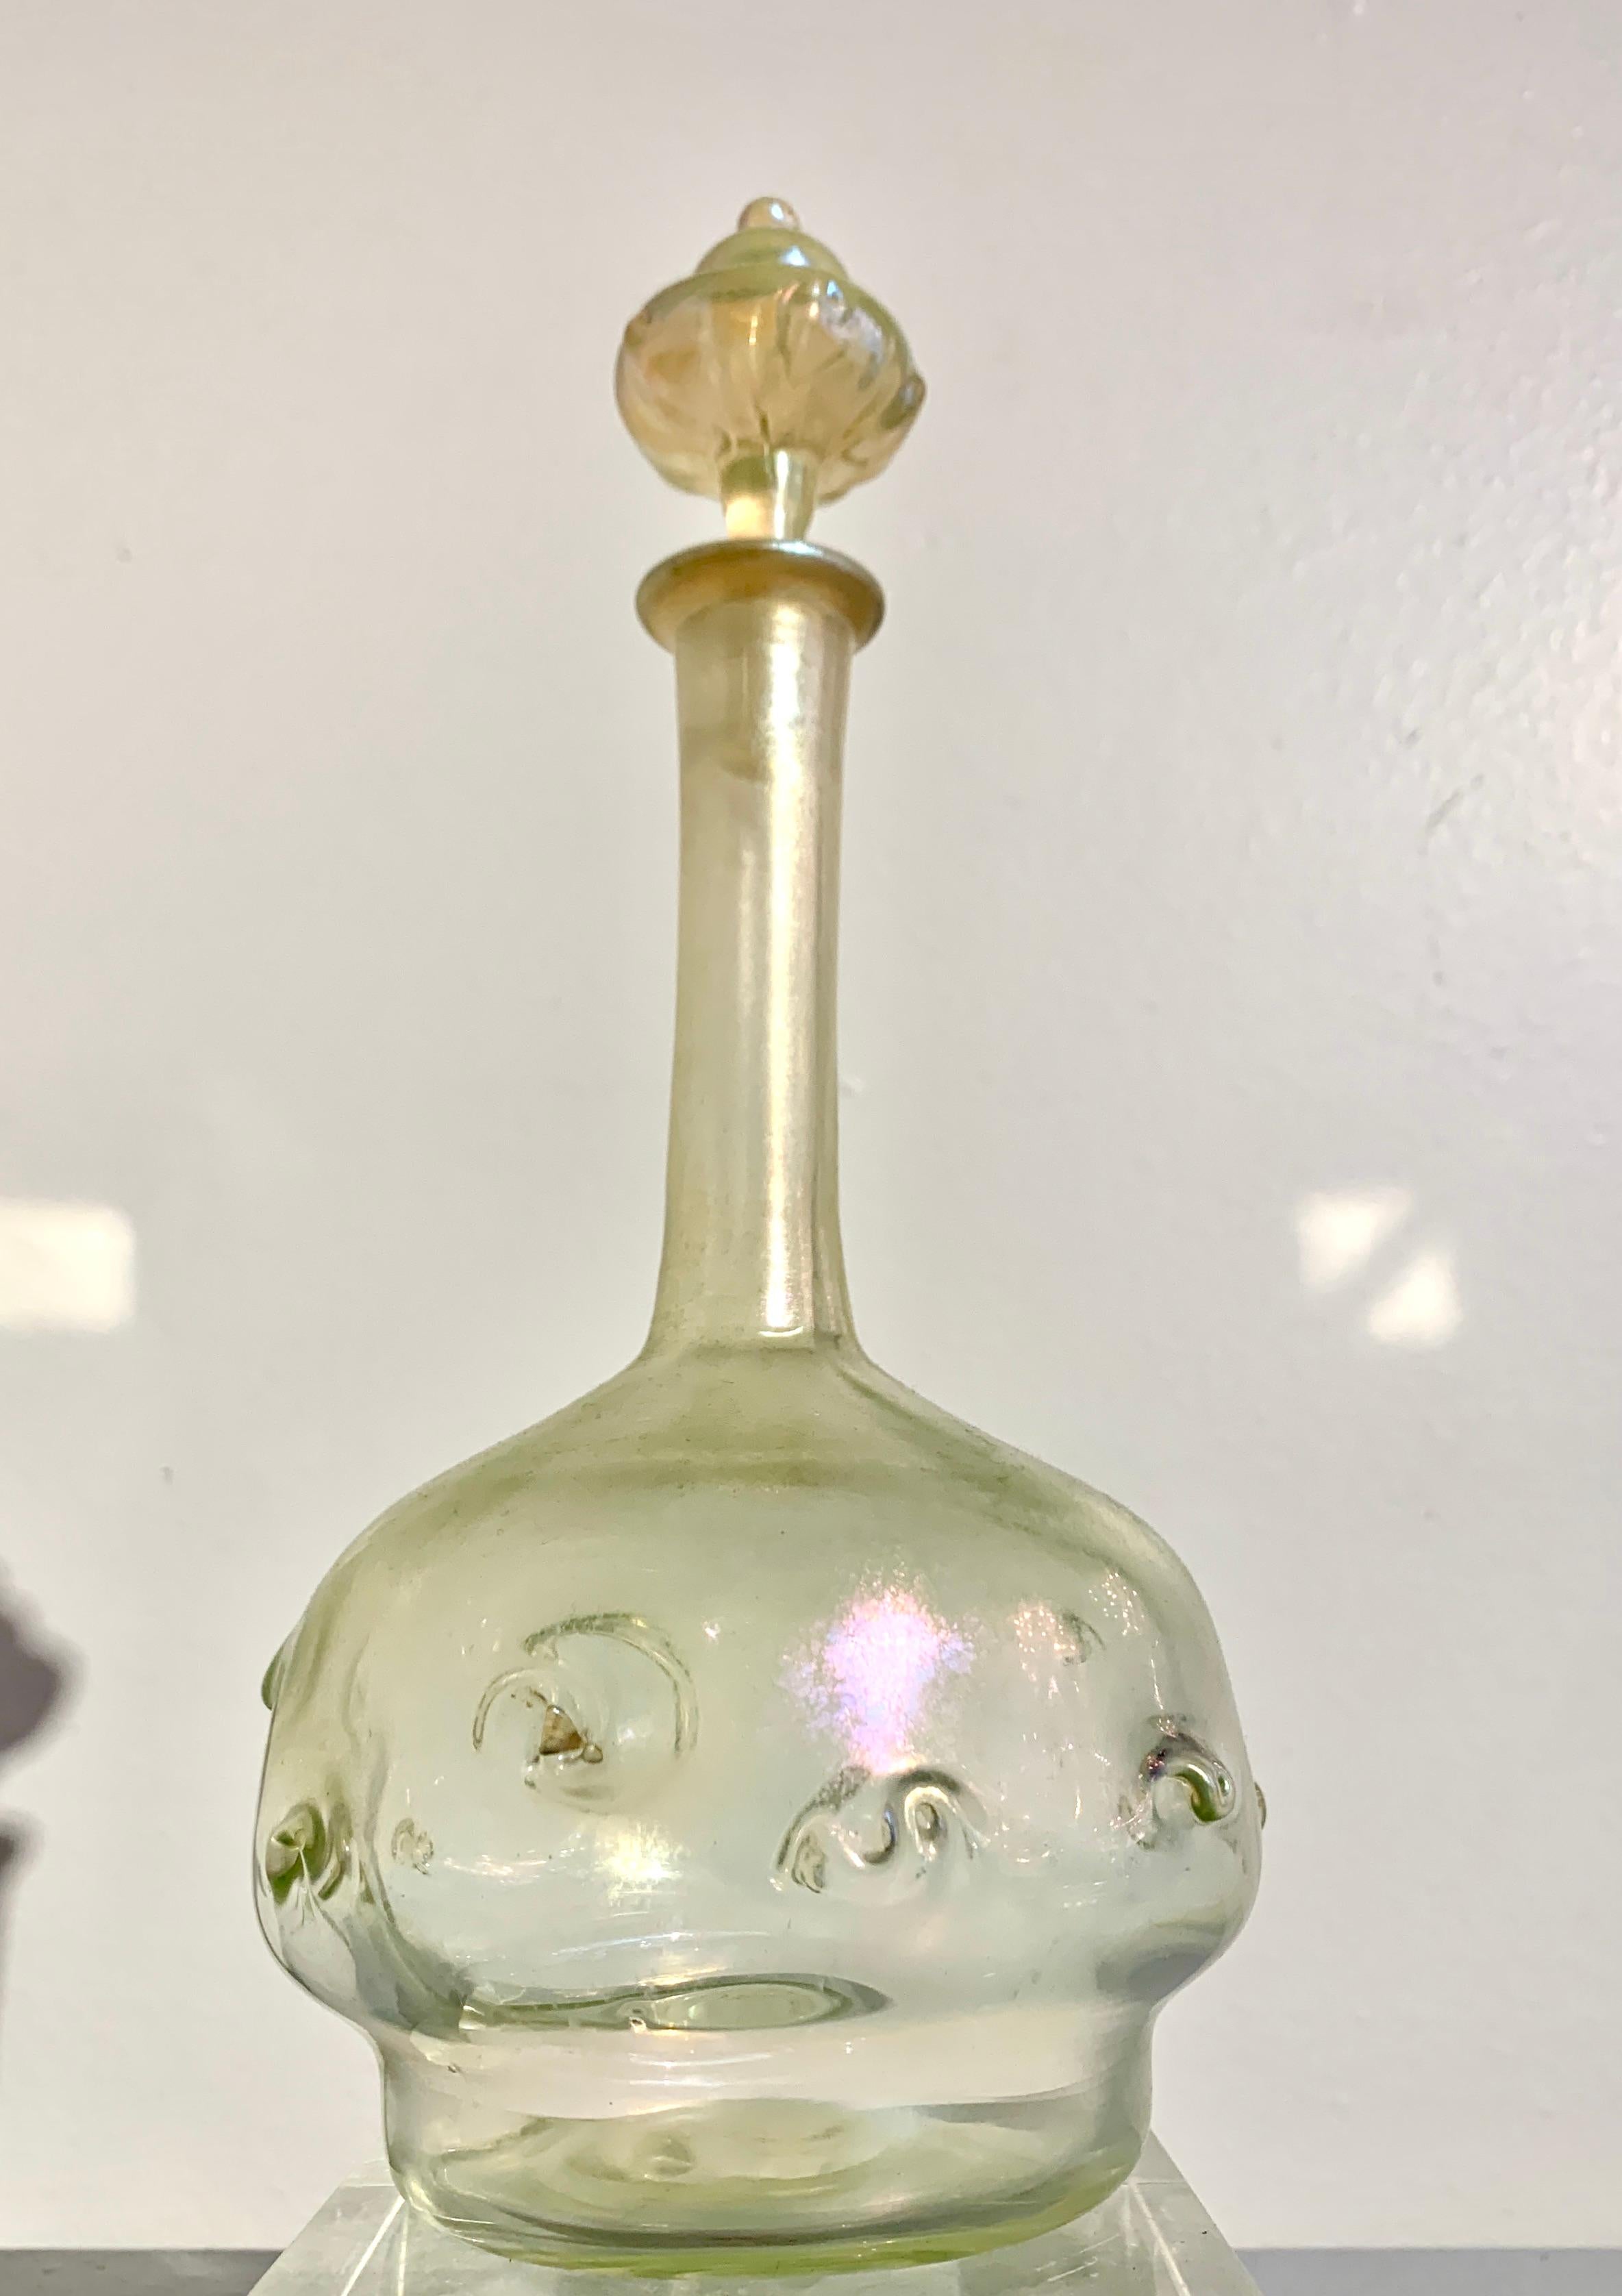 A wonderful Tiffany Studios favrile glass decanter and stopper with pigtail design, Art Nouveau period, early 20th century, United States. 

The transparent glass with a wonderful subtle iridescence that plays beautifully with changes in the